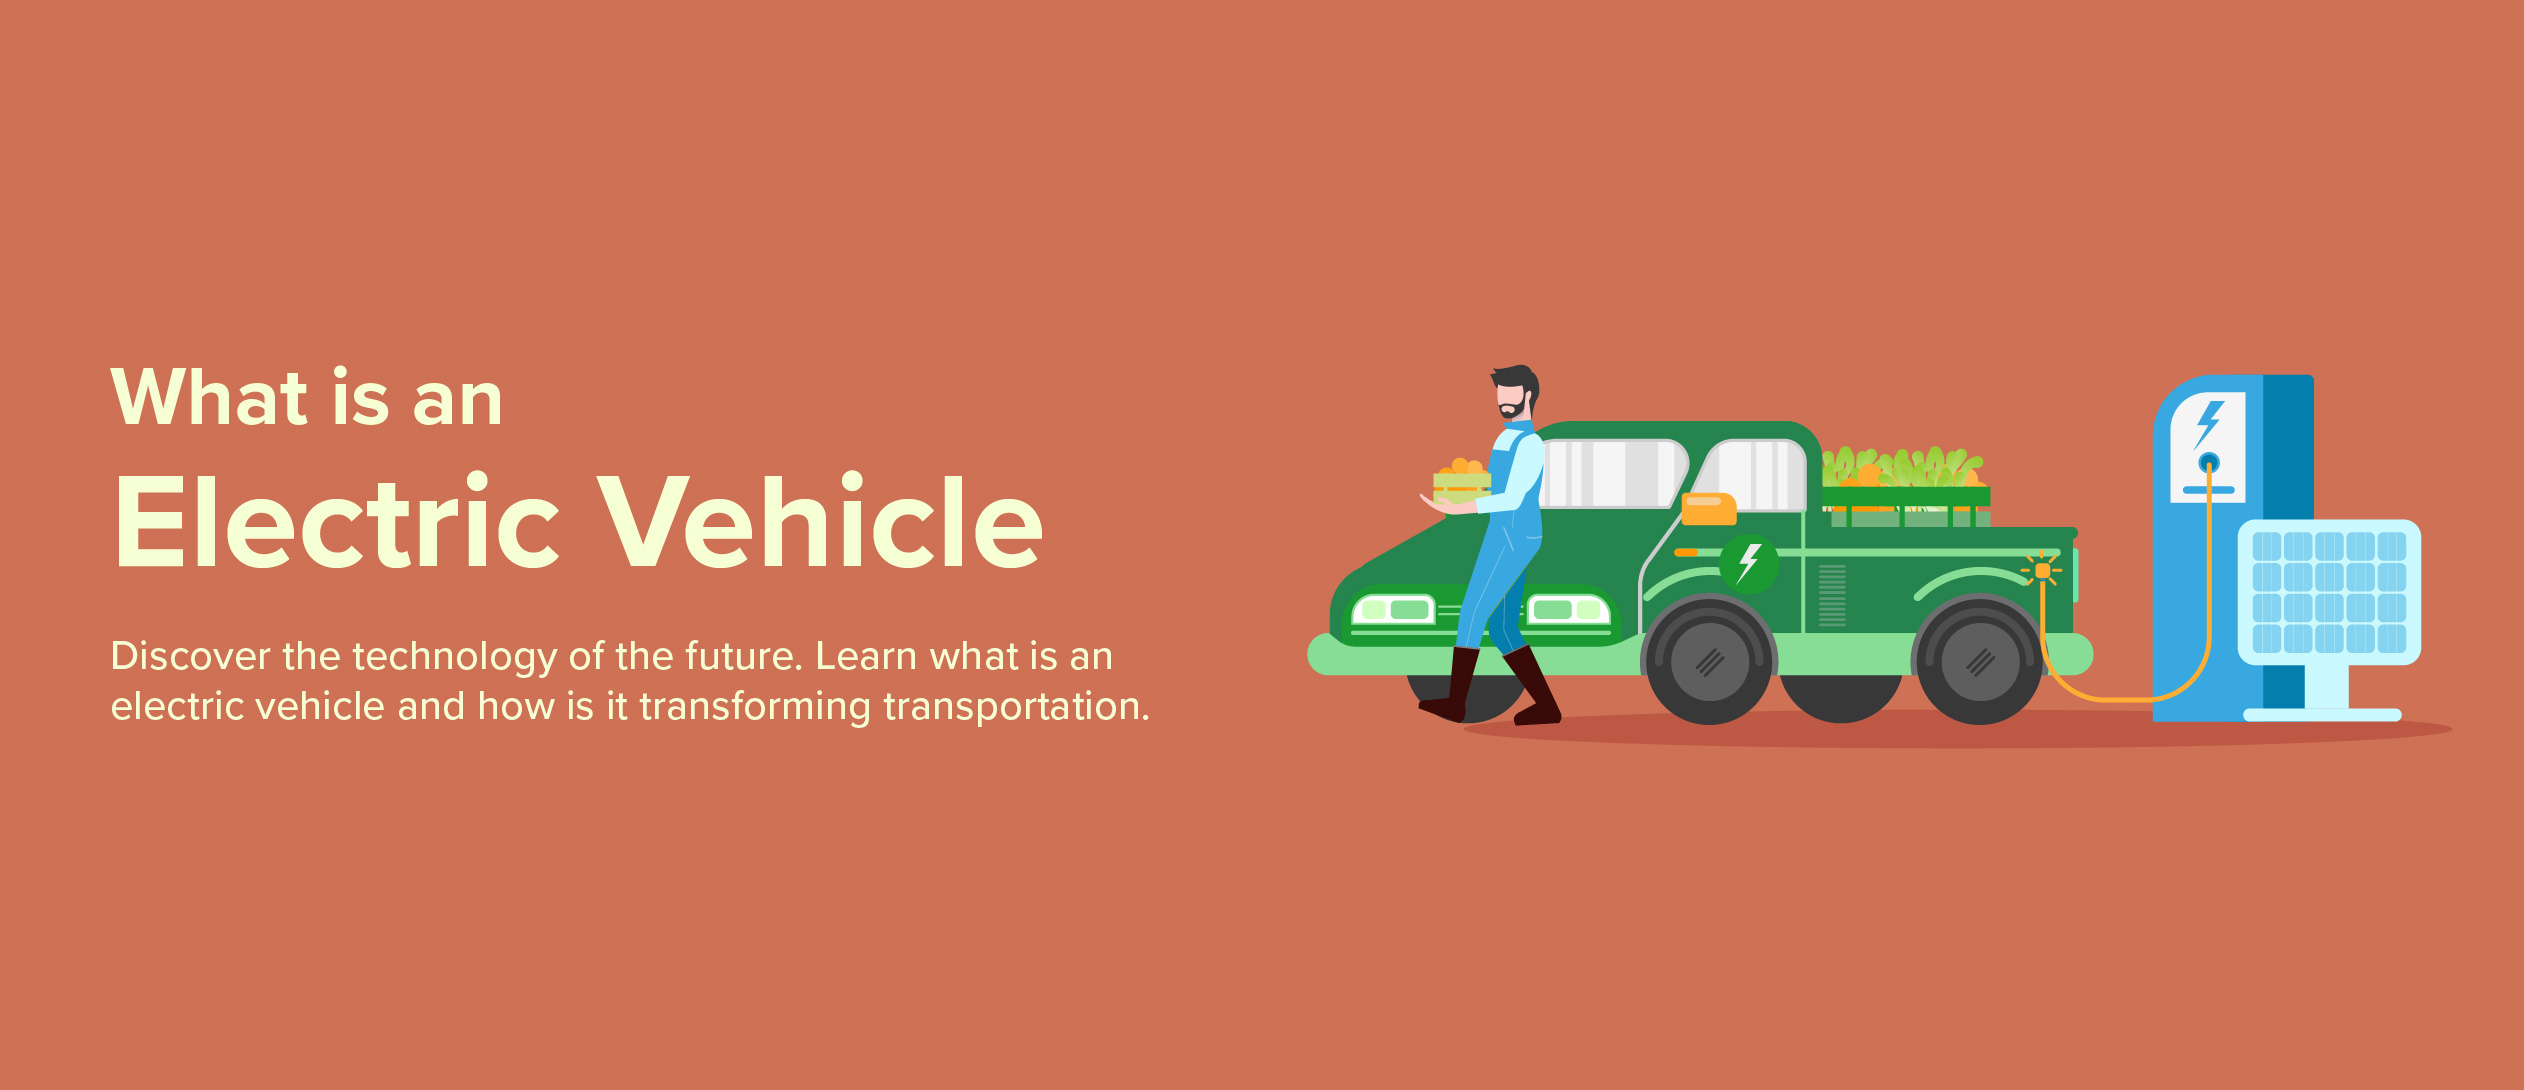 What is Electric Vehicle?